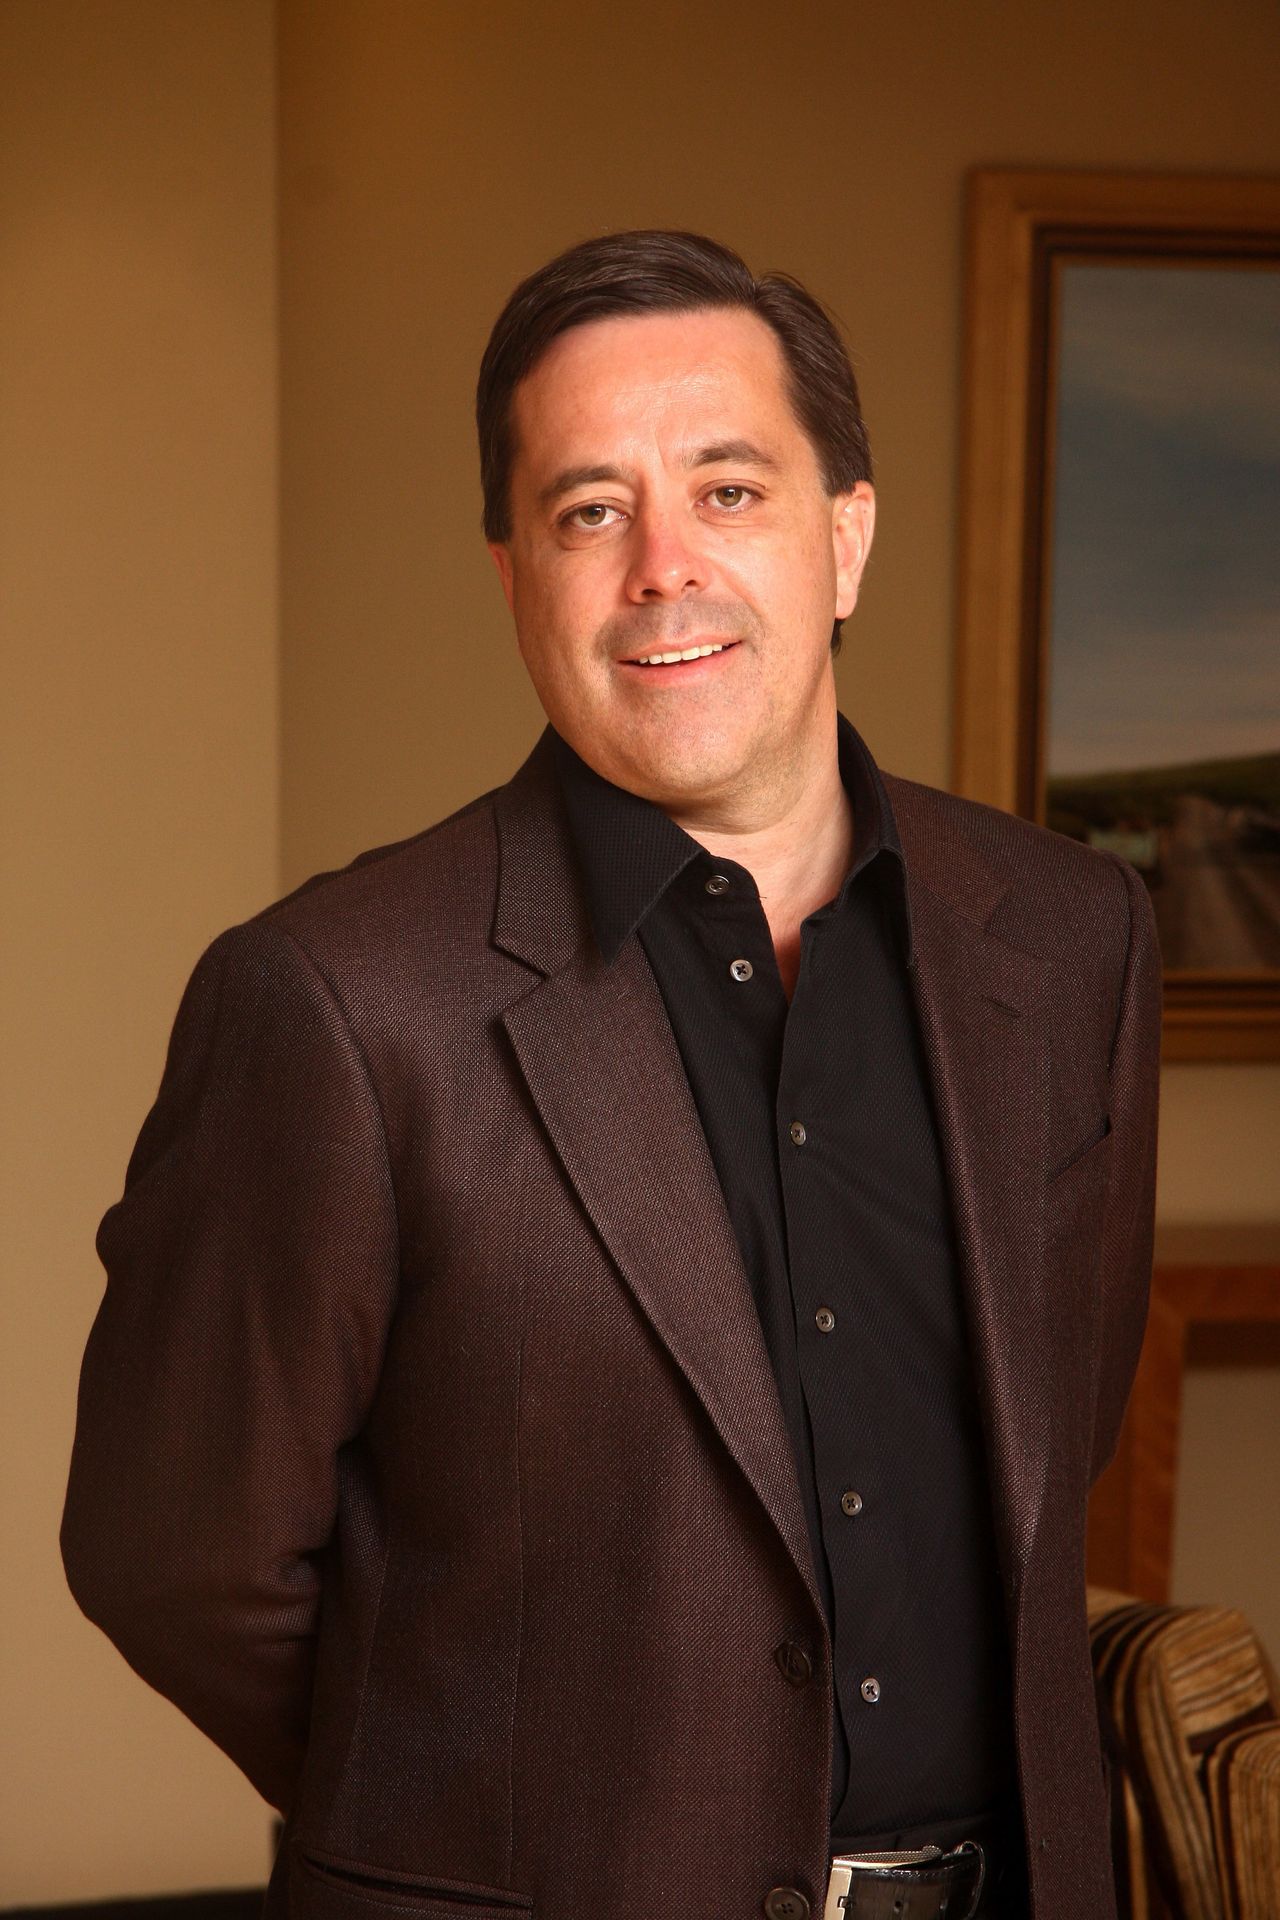 SOUTH AFRICA - August 2008: Markus Jooste, CEO of Steinhoff. (Photo by Gallo Images / Financial Mail / Jeremy Glyn)